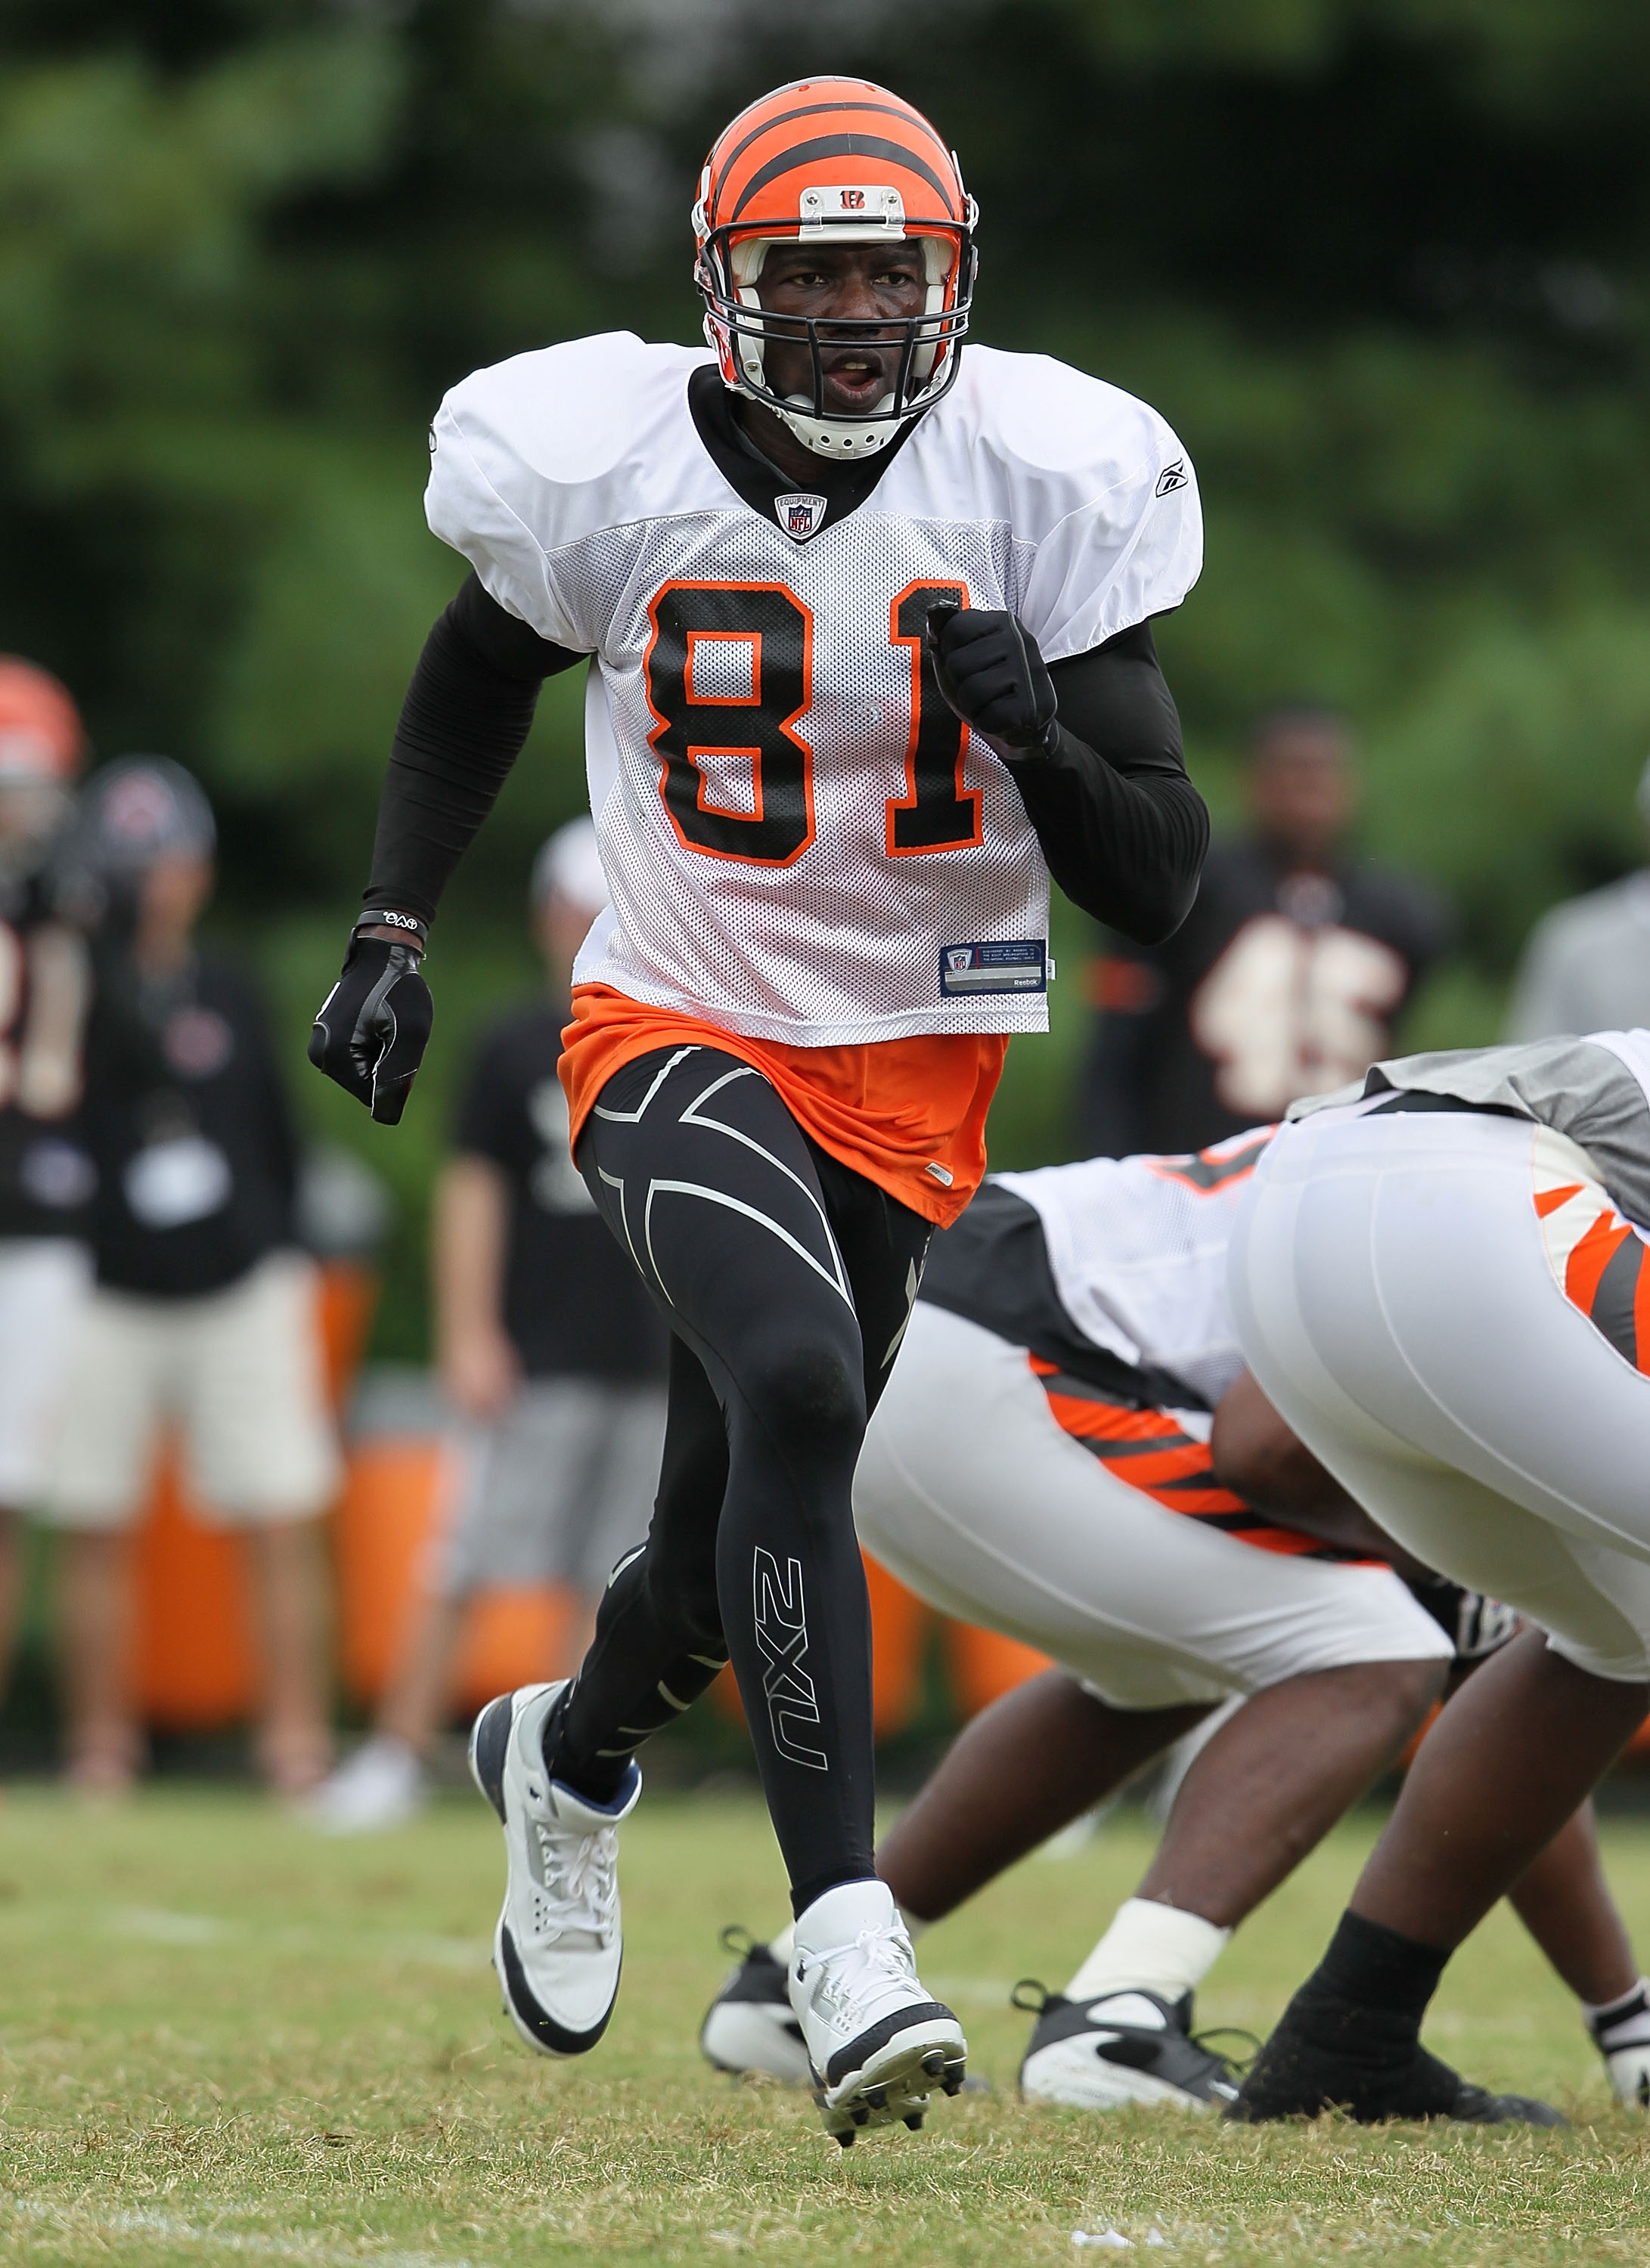 GEORGETOWN, KY - JULY 31:  Terrell Owens #81 of the Cincinnati Bengals is pictured during the Bengals training camp at Georgetown College on July 31, 2010 in Georgetown, Kentucky.  (Photo by Andy Lyons/Getty Images)